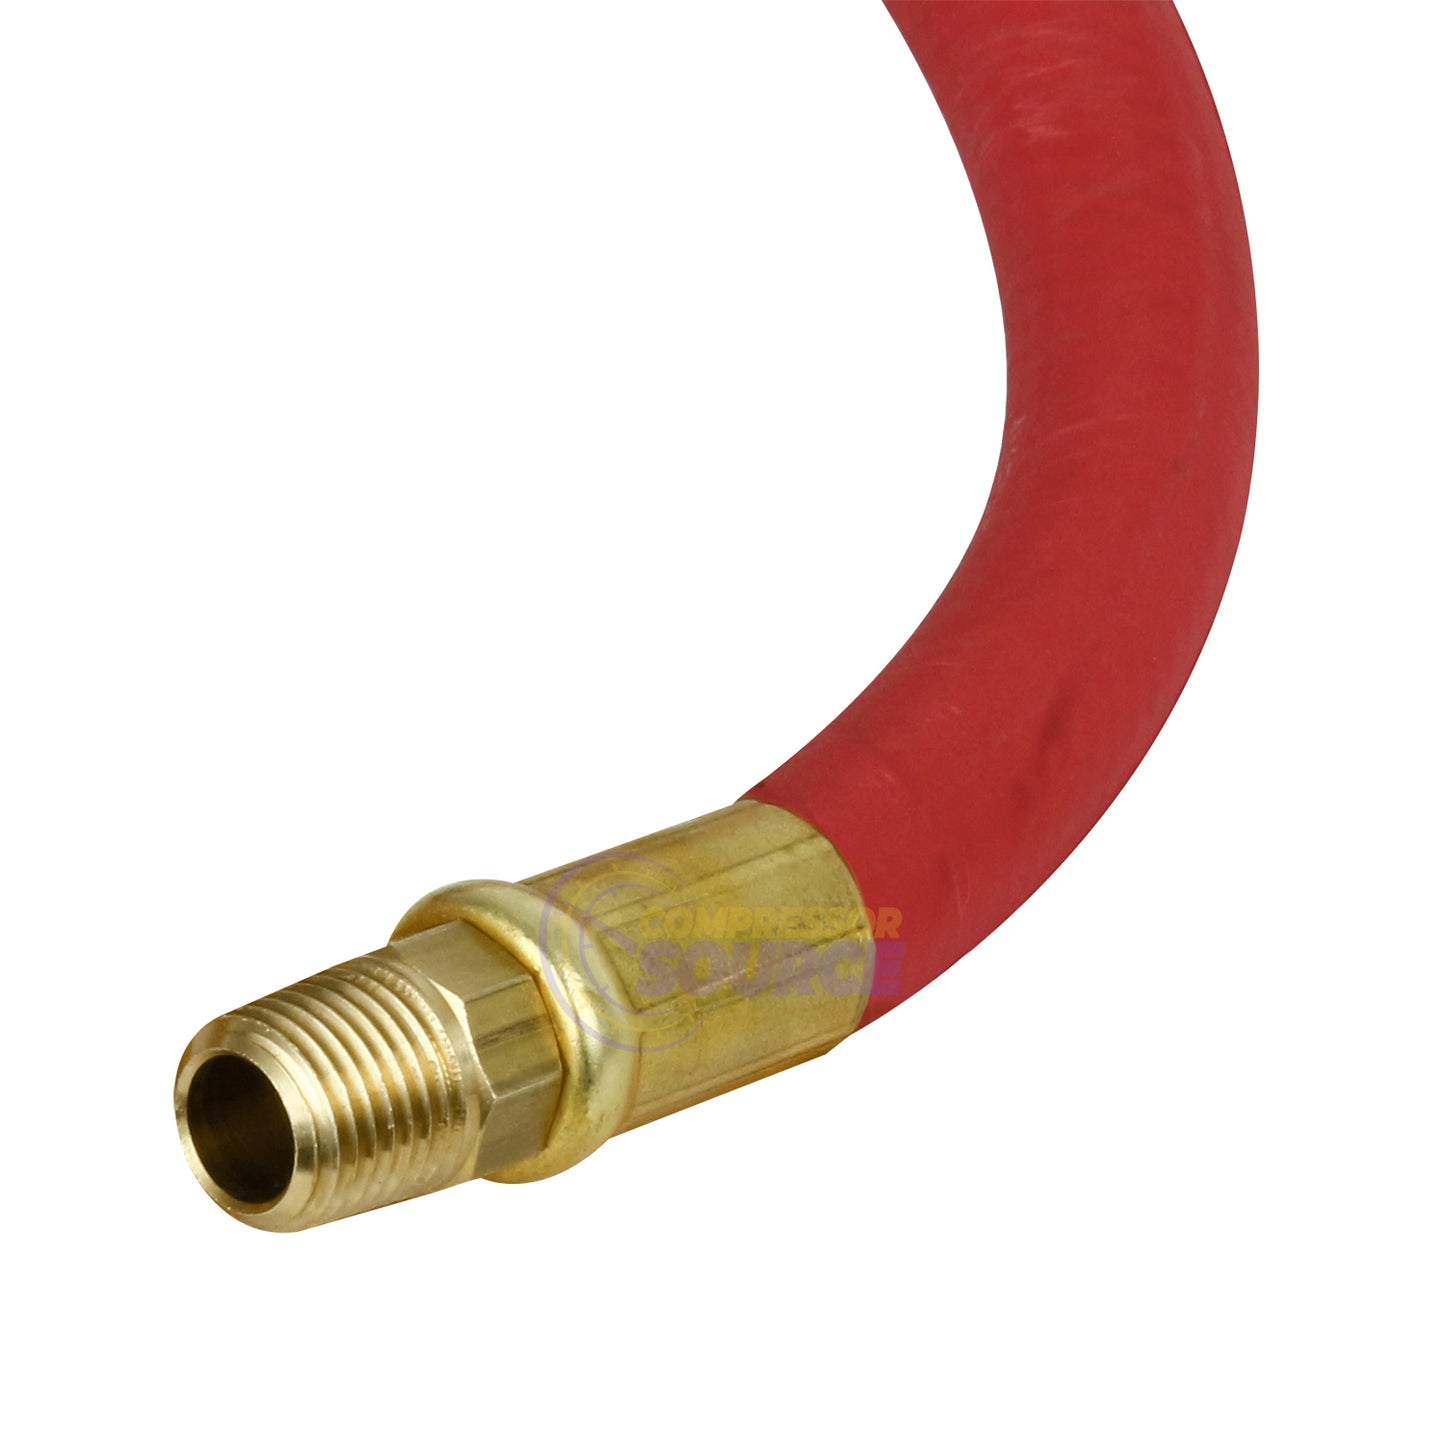 Continental Rubber Air Hose 3 Feet x 3/8 Inch 250 PSI Oil-Resistant Red 10368